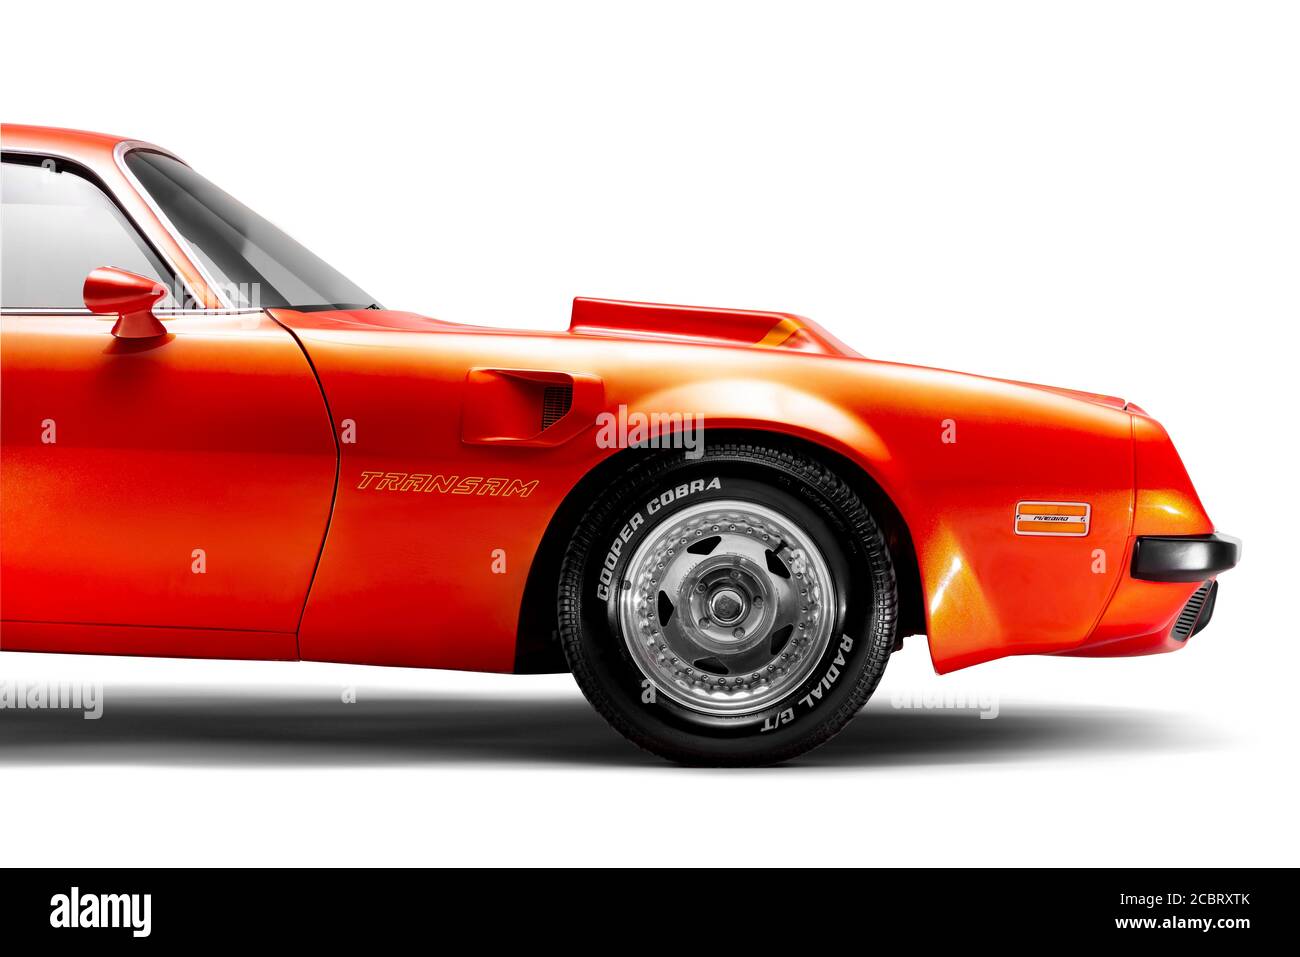 Izmir, Turkey - July 11, 2020: Orange colored Side front view of a 1974 Pontiac Trans Am Brand muscle car on a white background studio shot. Stock Photo